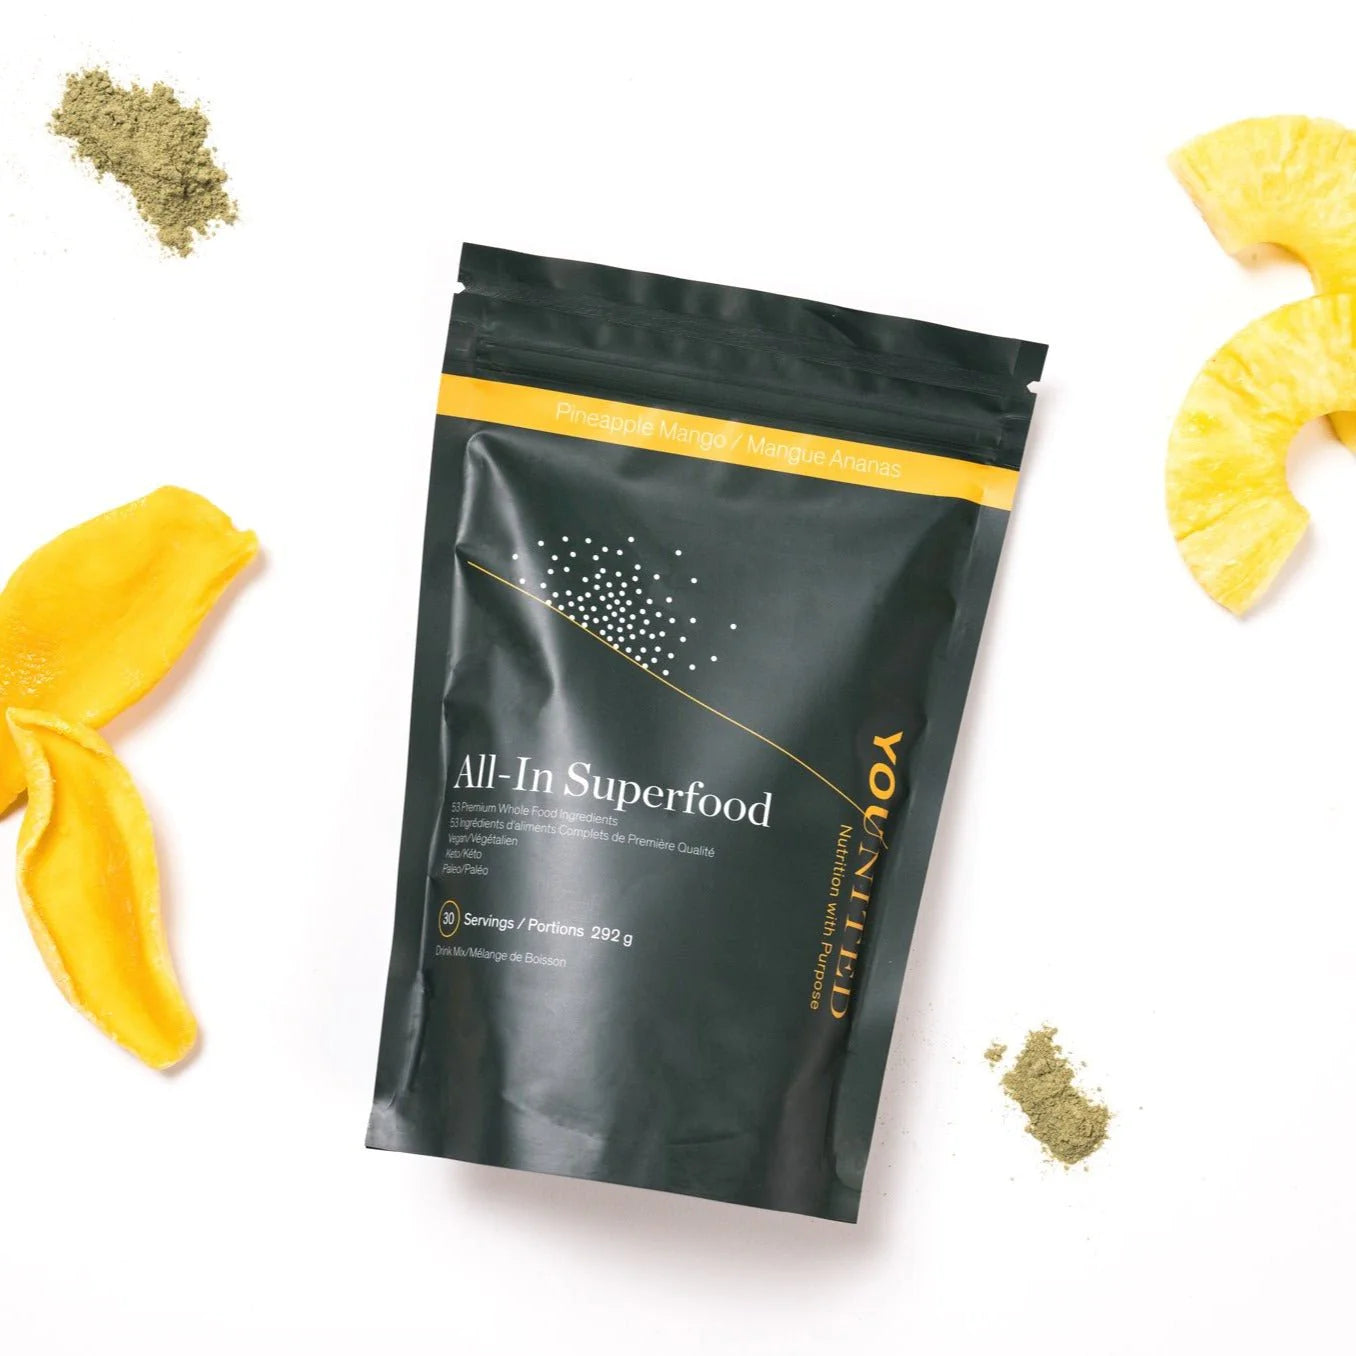 All-In Superfood - Pineapple Mango